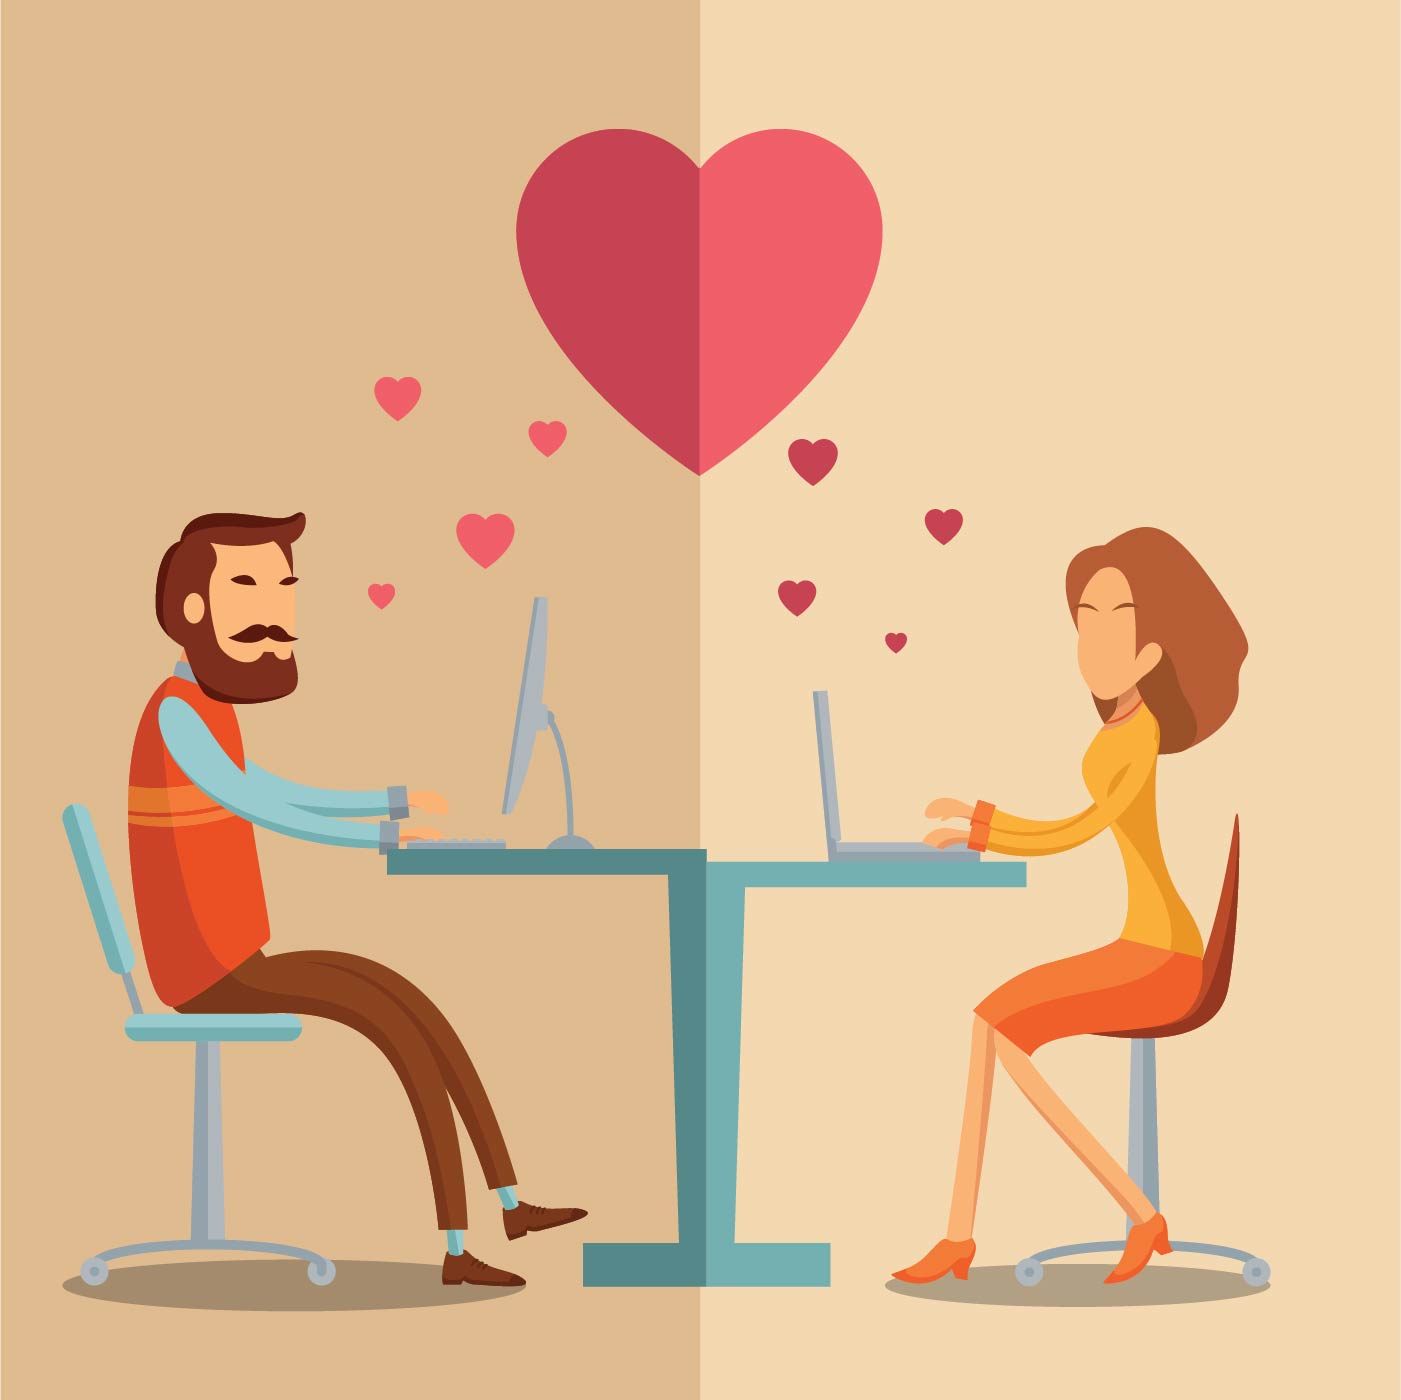 4 online dating rules to help you find your perfect match | Canadian Living